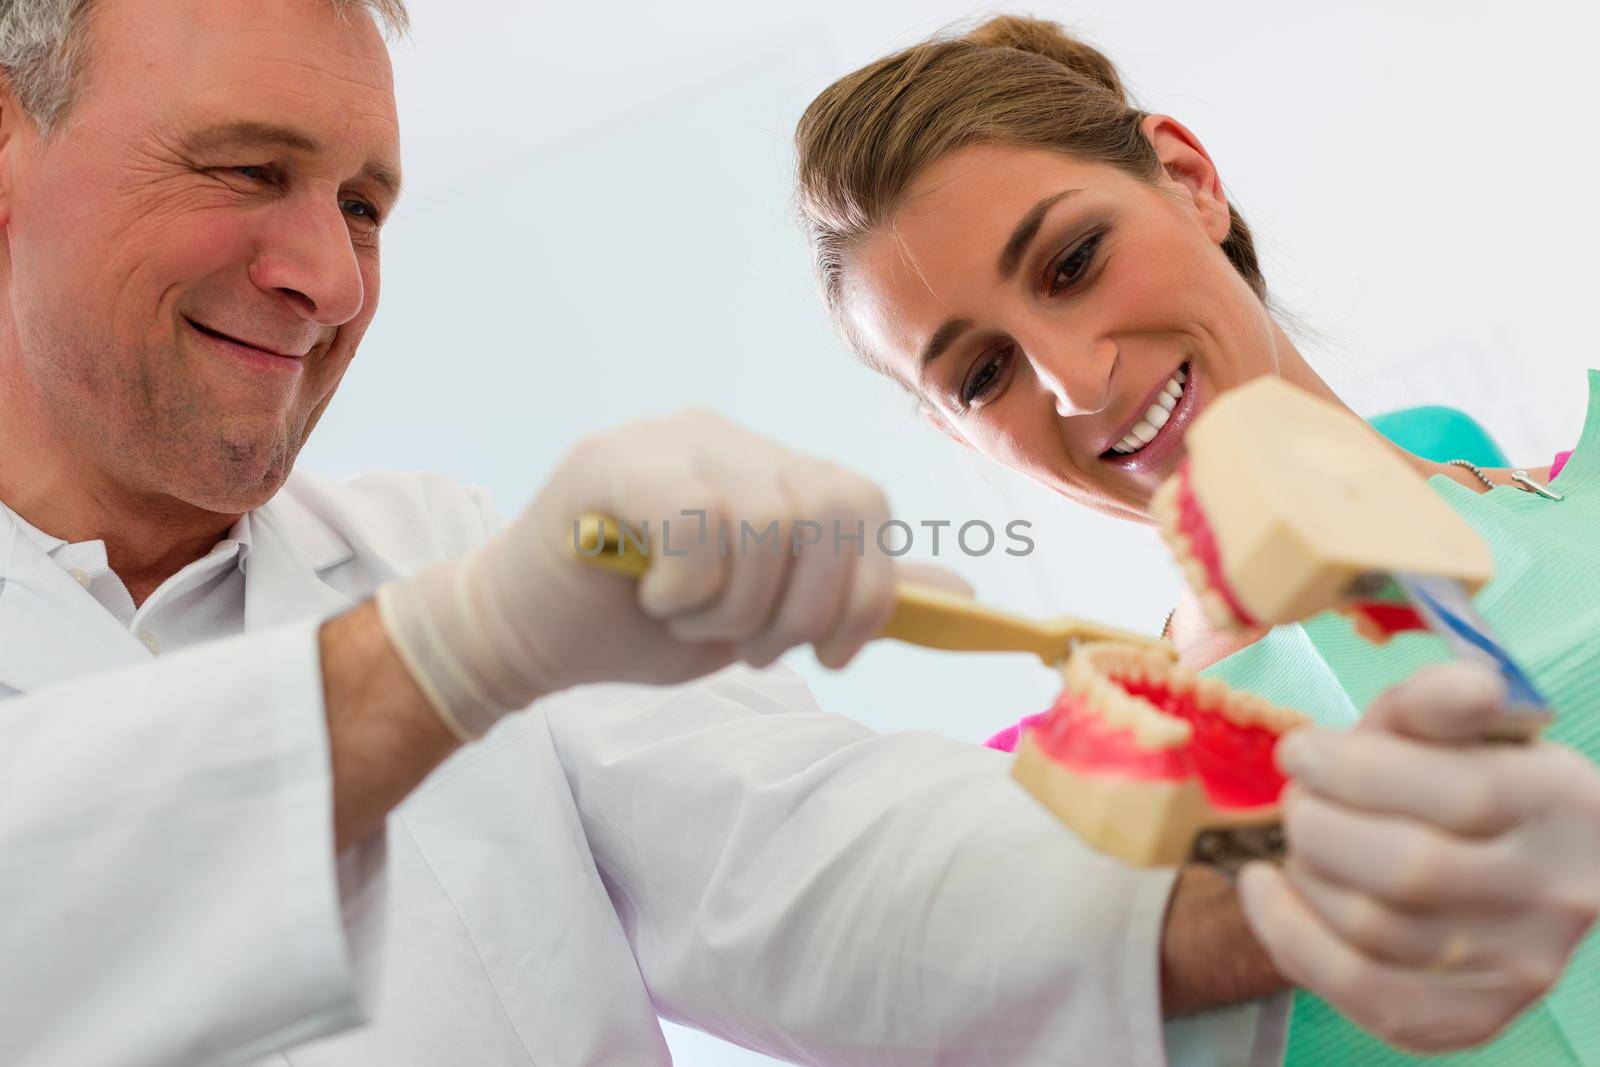 Dentist explaining teeth brushing to patient with an artificial set of teeth